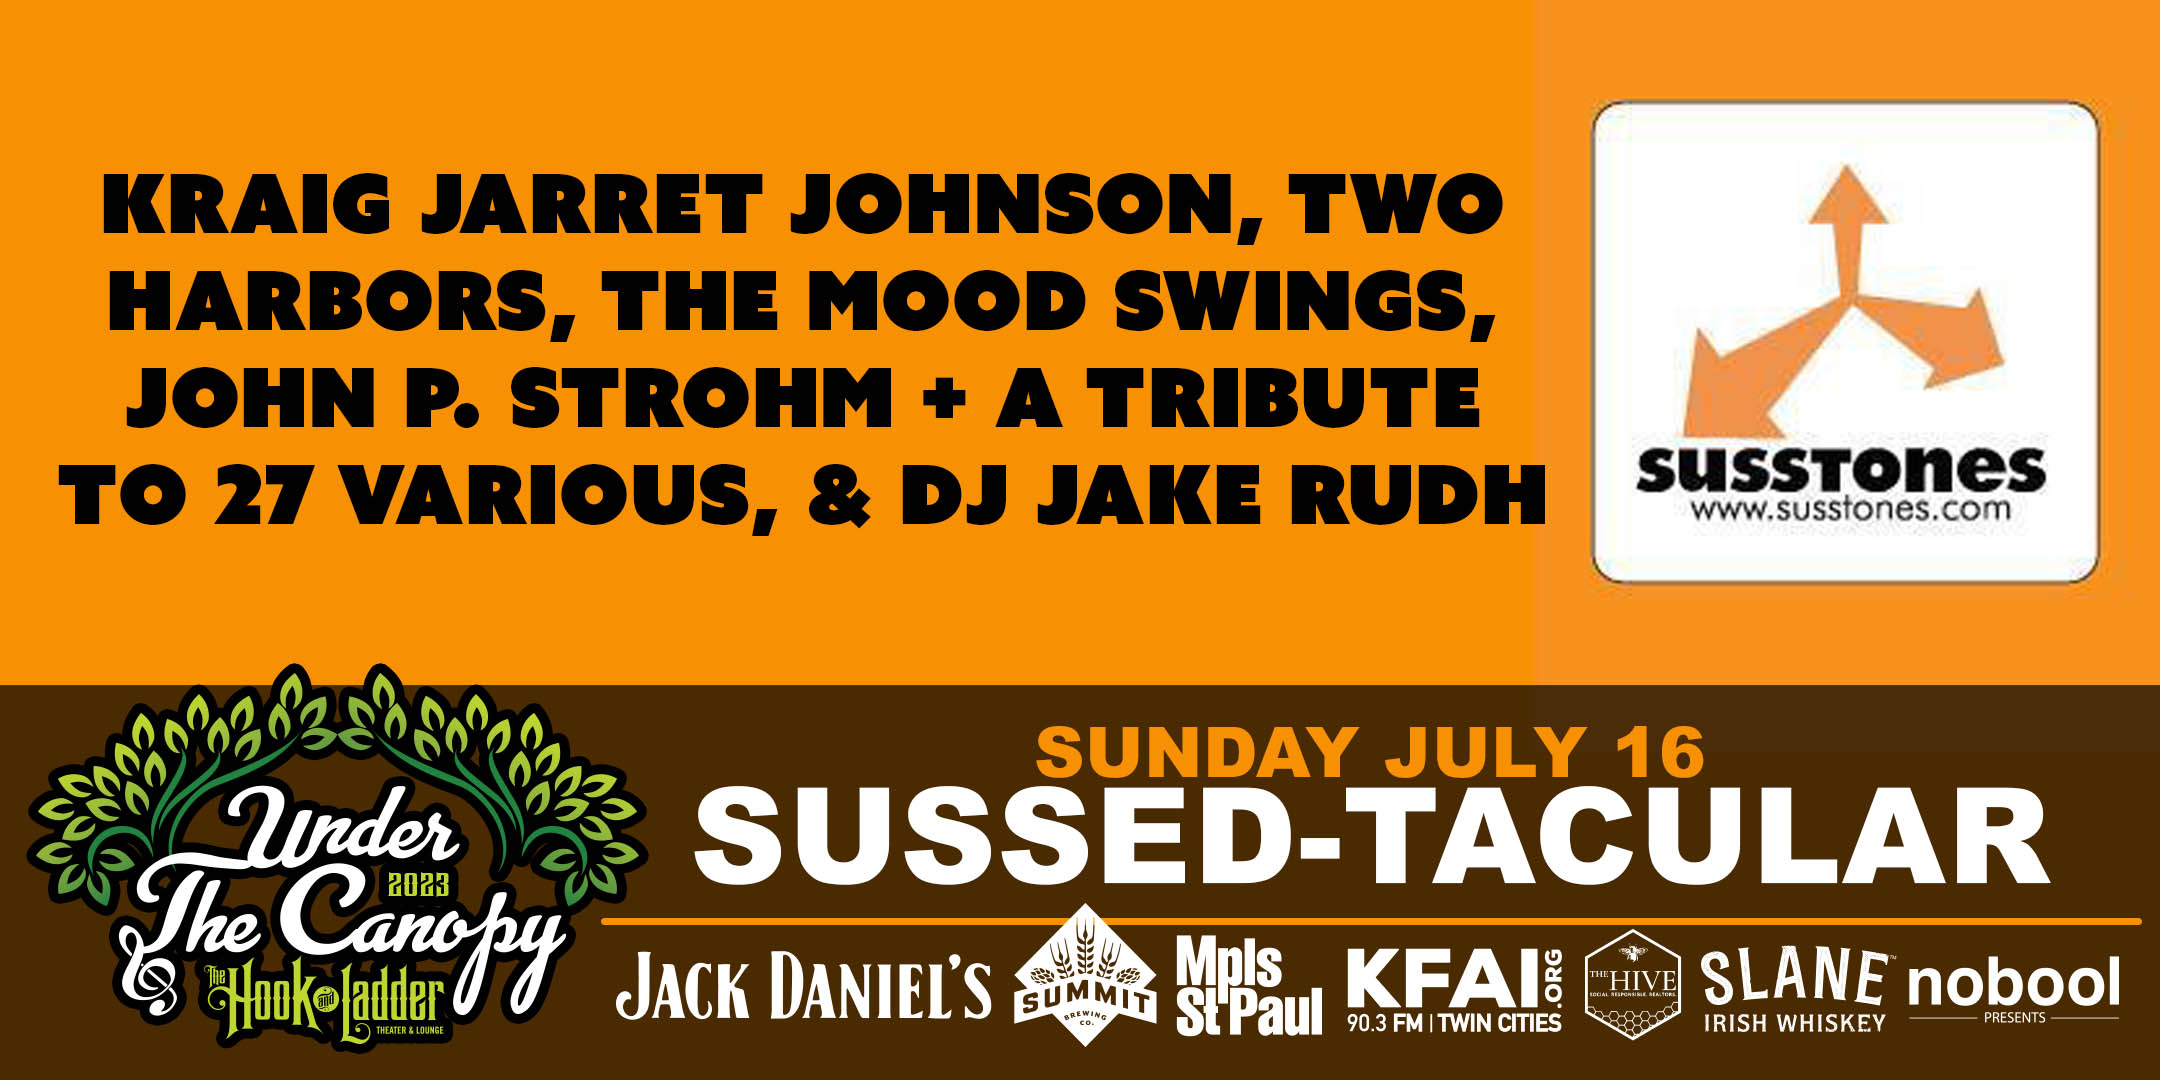 SUSSED-TACULAR Celebrating new music on Ed Ackerson’s birthday! Performances by Kraig Jarret Johnson, Two Harbors, The Mood Swings, John P. Strohm + A Tribute to 27 Various, & DJ Jake Rudh EXCLUSIVE LIMITED 45's BY EACH BAND Each band will be releasing a super limited edition, locally hand-made 45 record, only available at this show!! Sunday, July 16 Under The Canopy at The Hook and Ladder Theater "An Urban Outdoor Summer Concert Series" Doors 4:00pm :: Music 5:00pm :: Under 21 with Parent/Guardian Reserved Seats: $34 GA: $18 ADV / $24 DOS *Does not include Fees